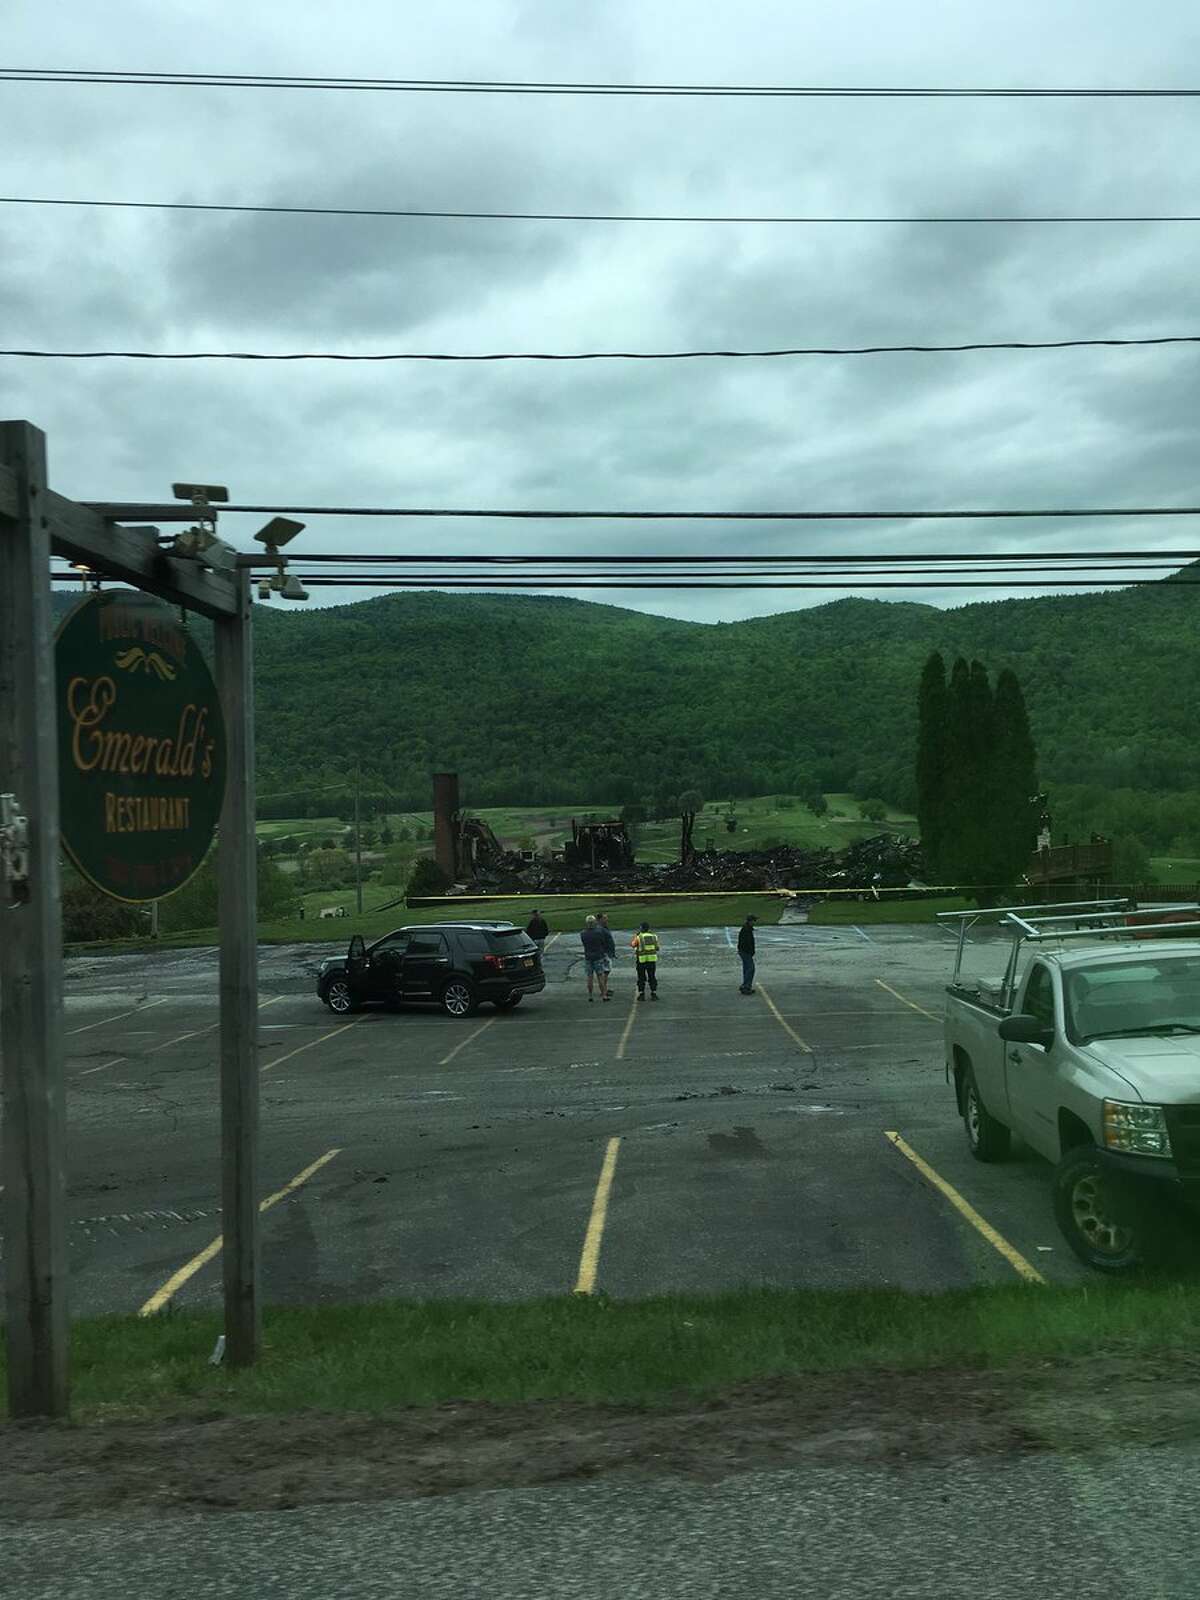 All that is left of the restaurant and clubhouse of Ticonderoga Golf Course Sunday, May 27, 2018 after a massive fire the night before. (Provided)